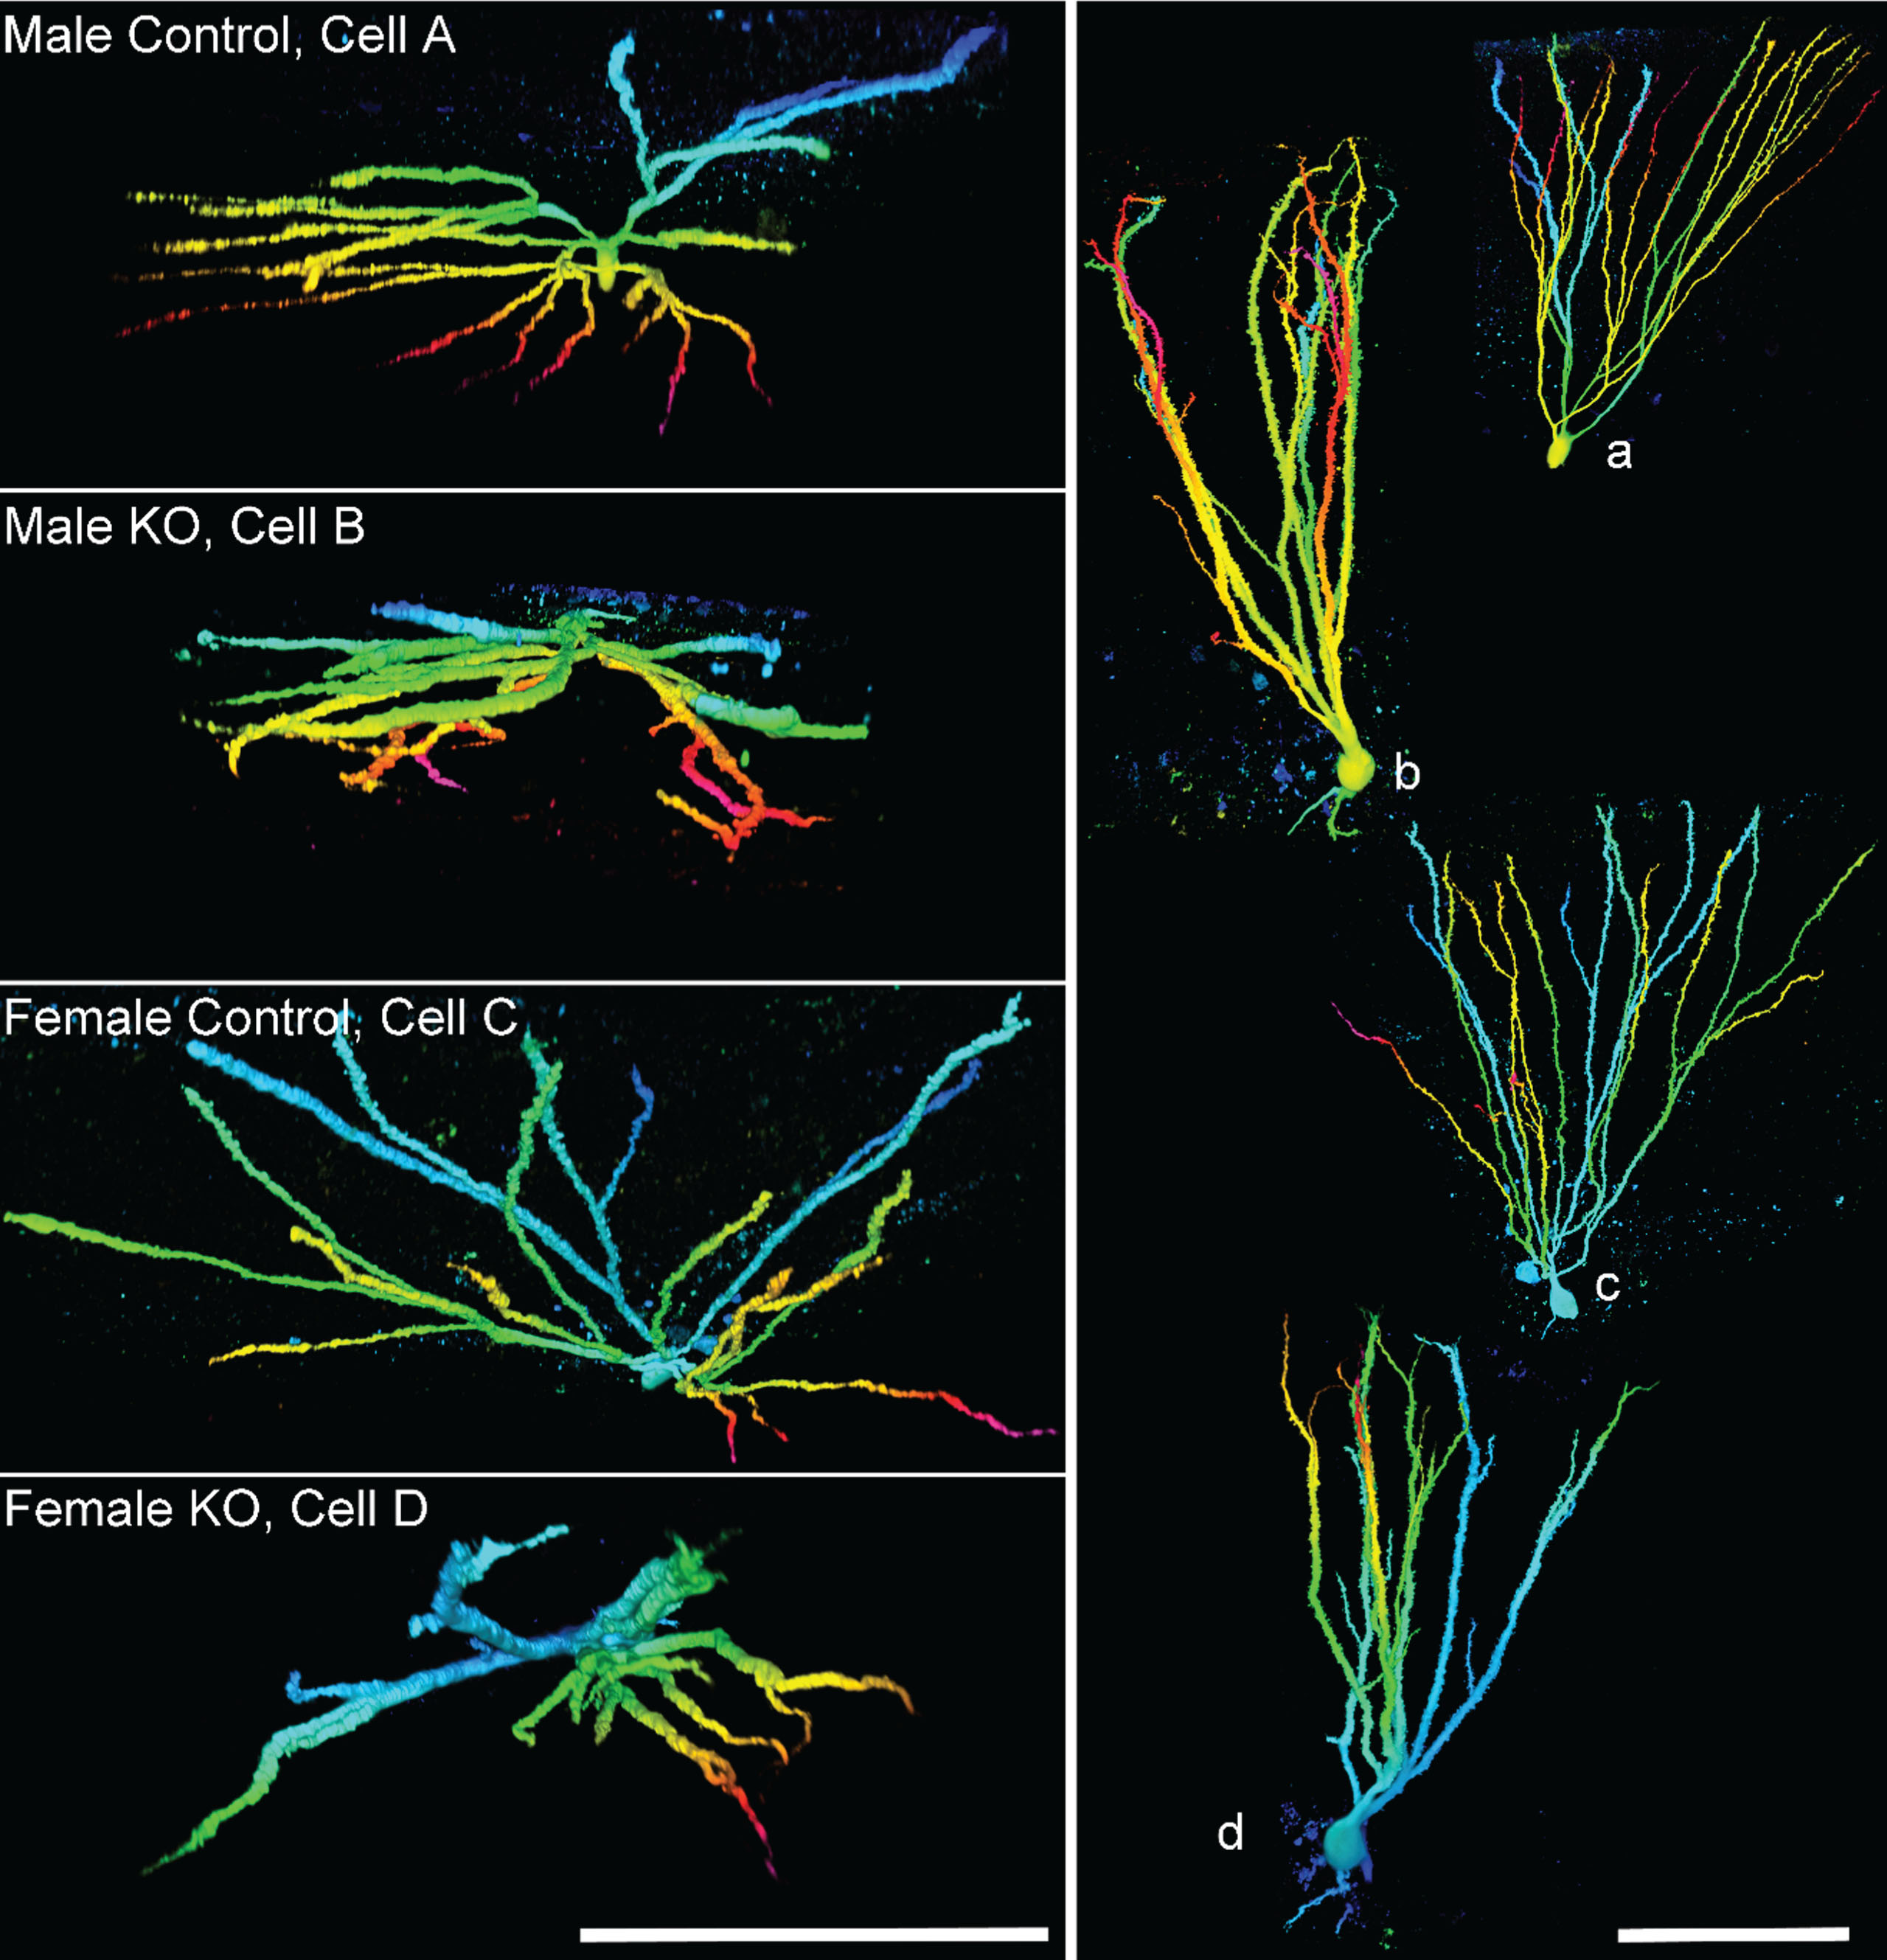 Images show granule cell reconstructions of PTEN expressing (control) and PTEN knockout (KO) cells from Gli1-CreERT2, PTENfl/fl mice. Cell morphology was revealed by biocytin filling. Cells are projected from above (left, cells A–D), looking down from the top of the dendritic tree towards the soma, and in profile (right, a–d). Note the more limited spread of the dendritic tree among KO cells, and frequent overlapping dendrites. Reconstructions are color-coded by depth. Scale bars = 100μm. Imaged reproduced from Santos et al. [56].